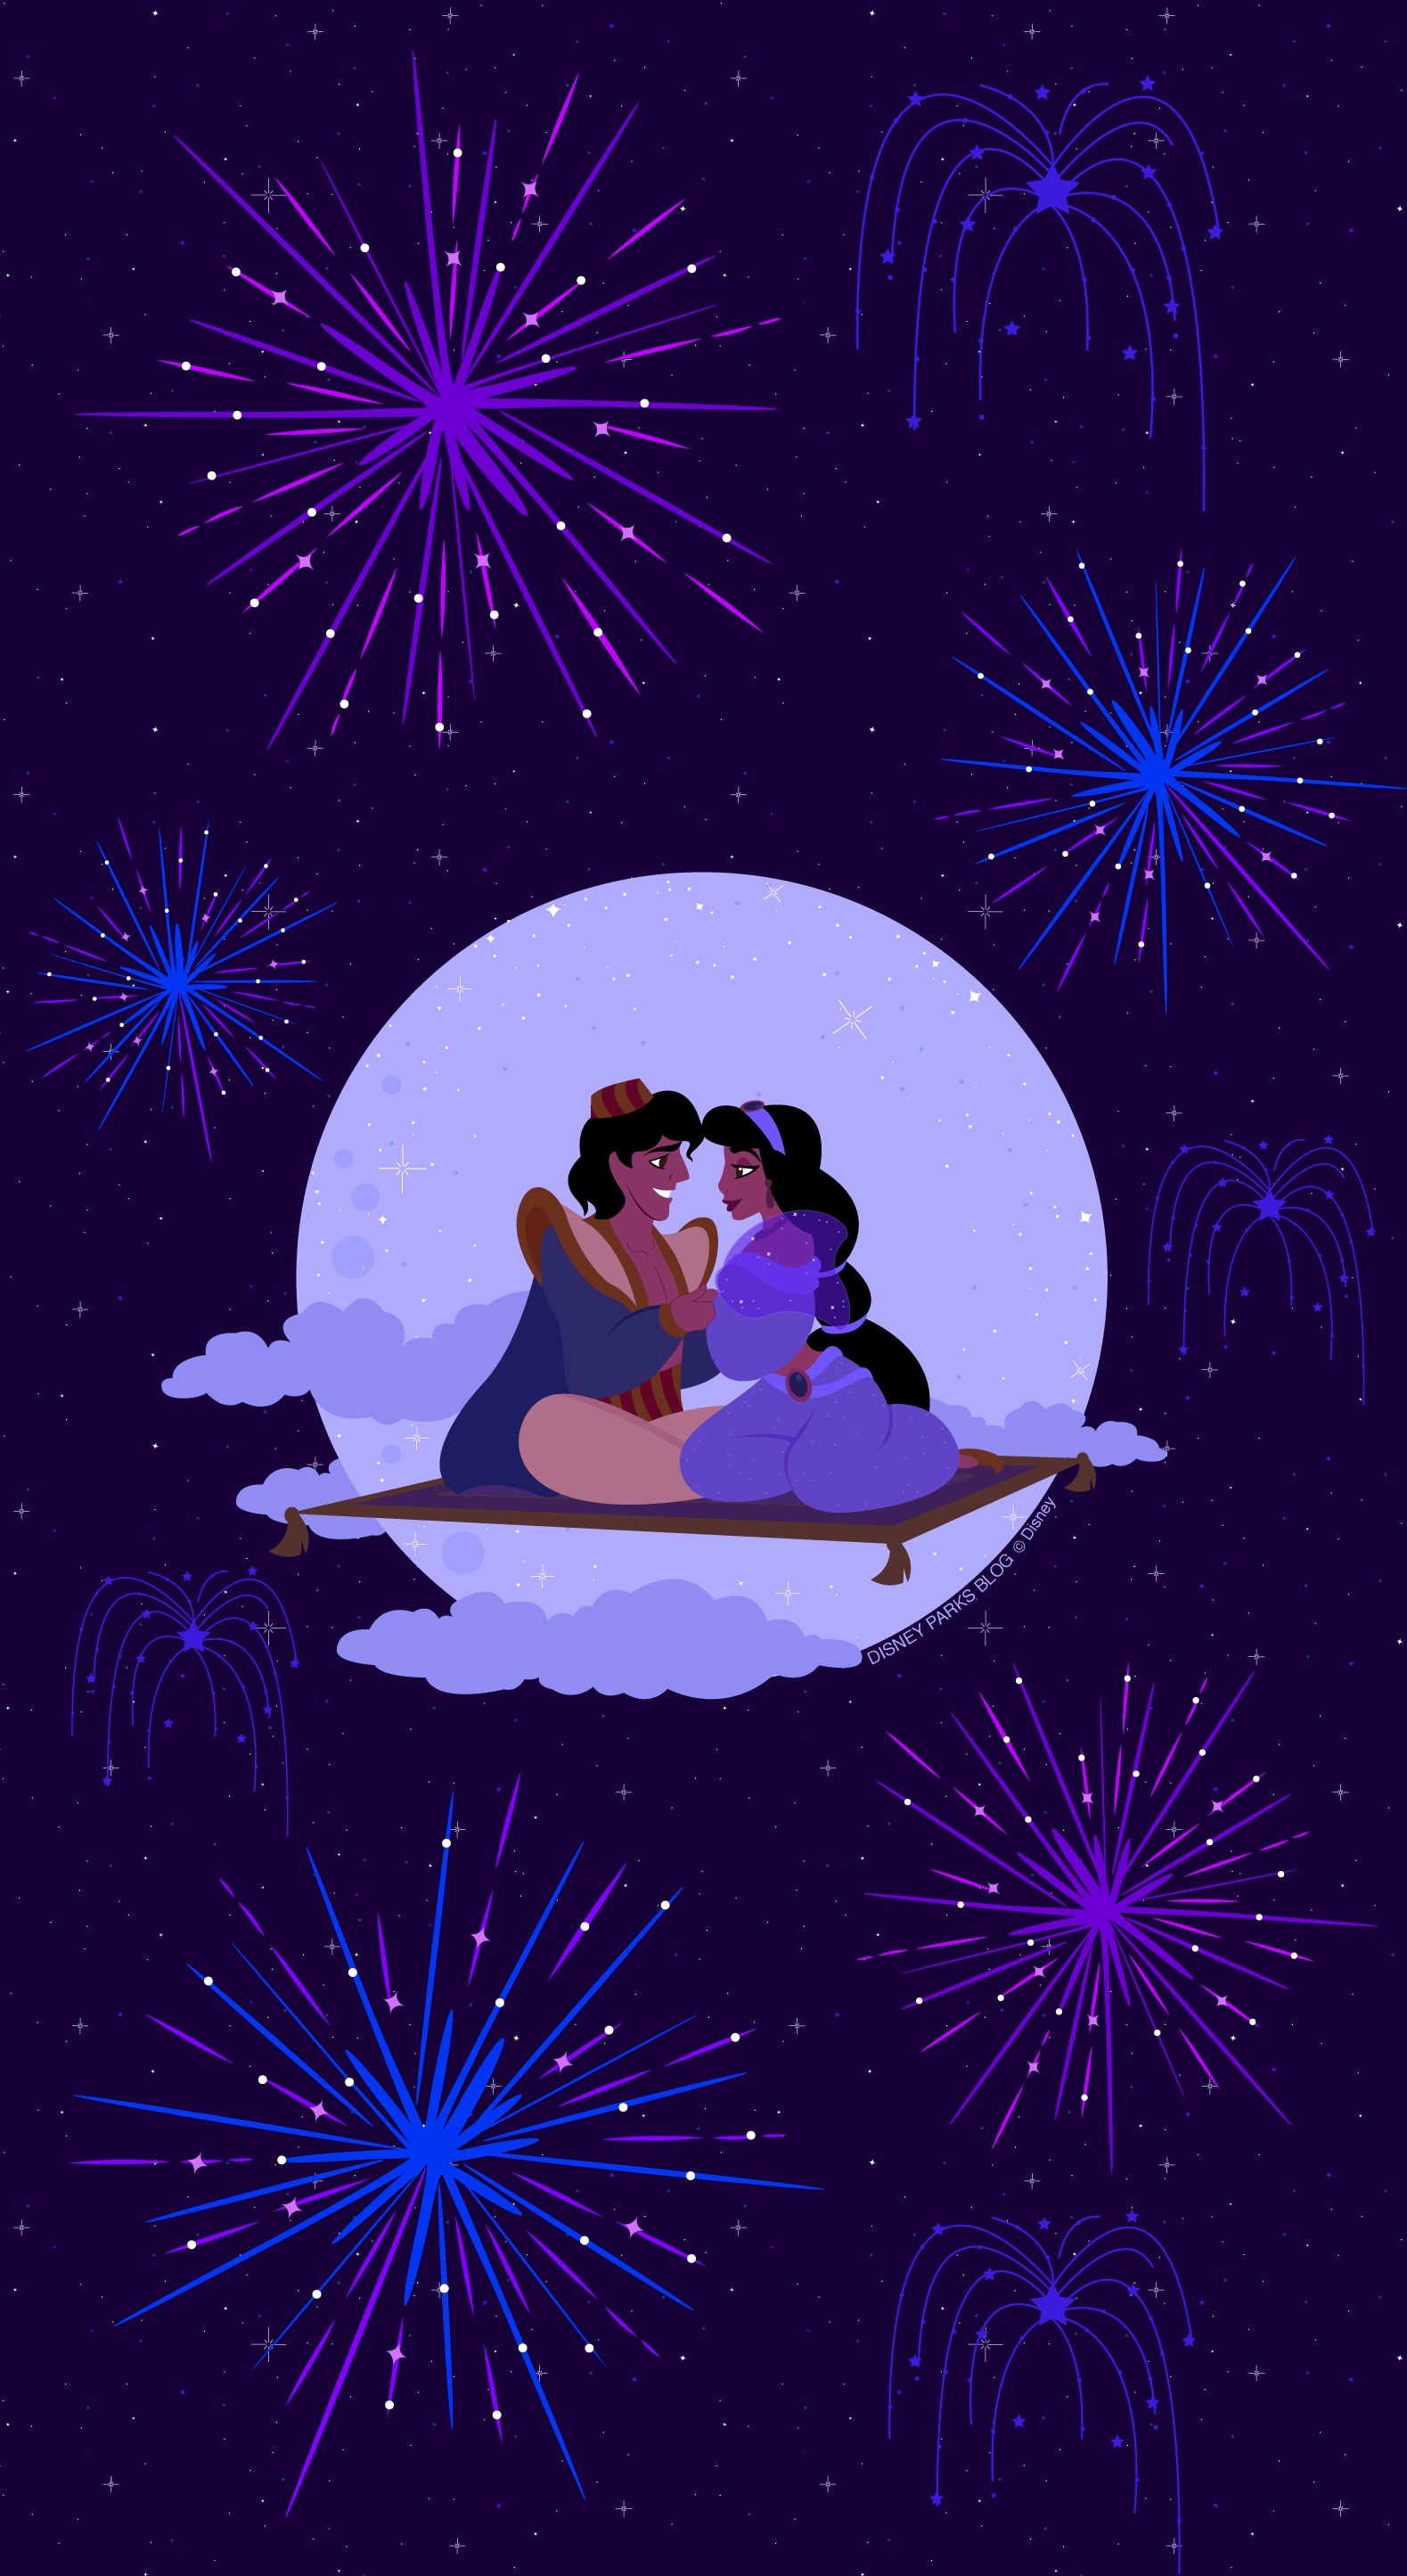 Ring In The New Year With Our Disney Fireworks-Inspired Wallpaper – Mobile  | Disney Parks Blog